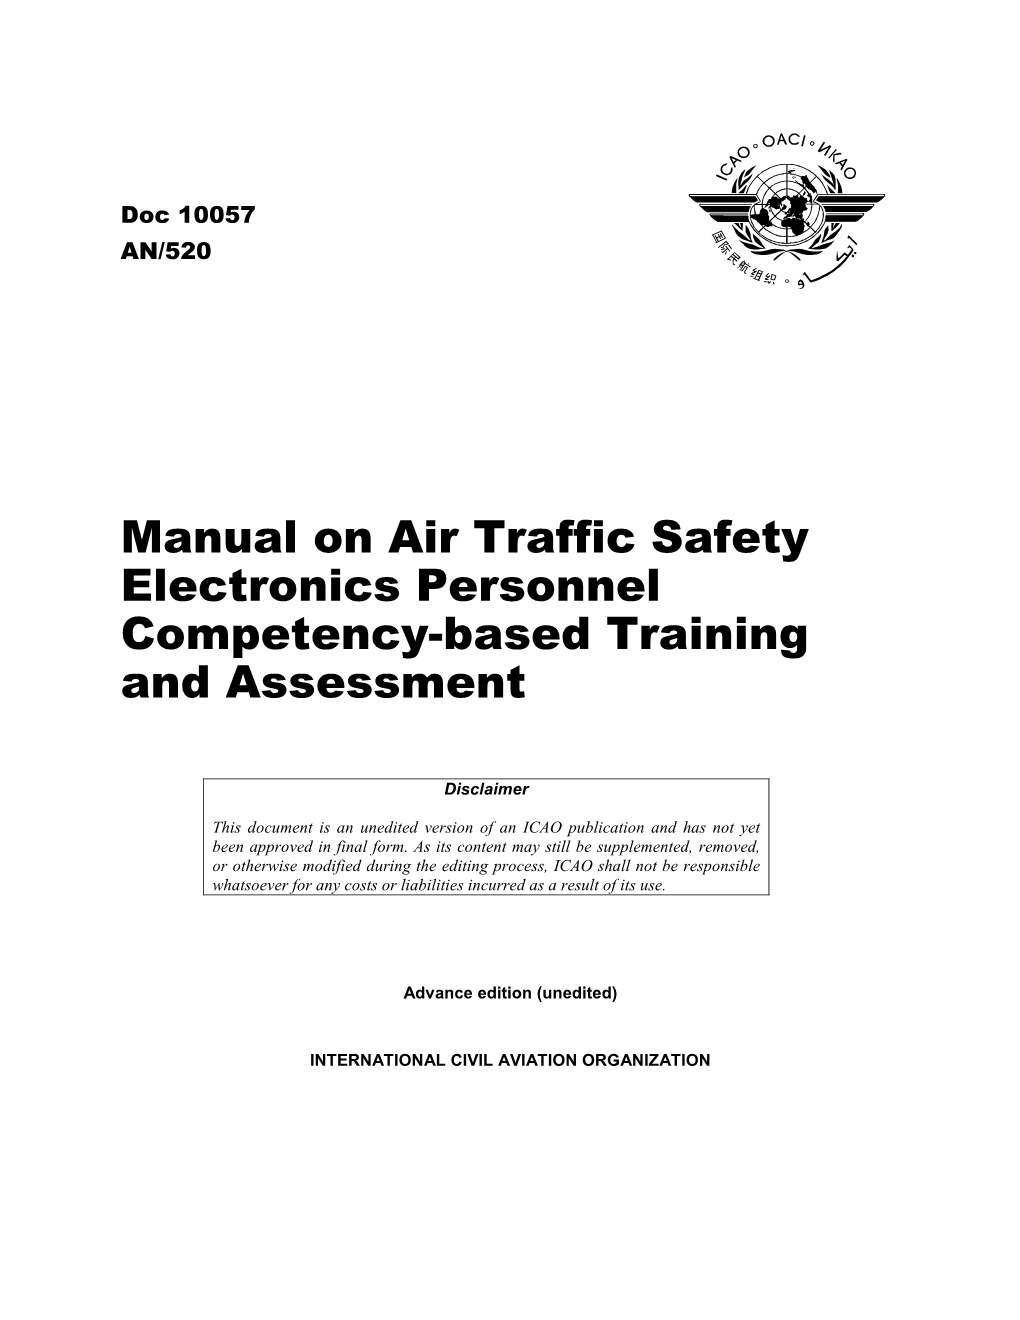 Manual on Air Traffic Safety Electronics Personnel Competency-Based Training and Assessment